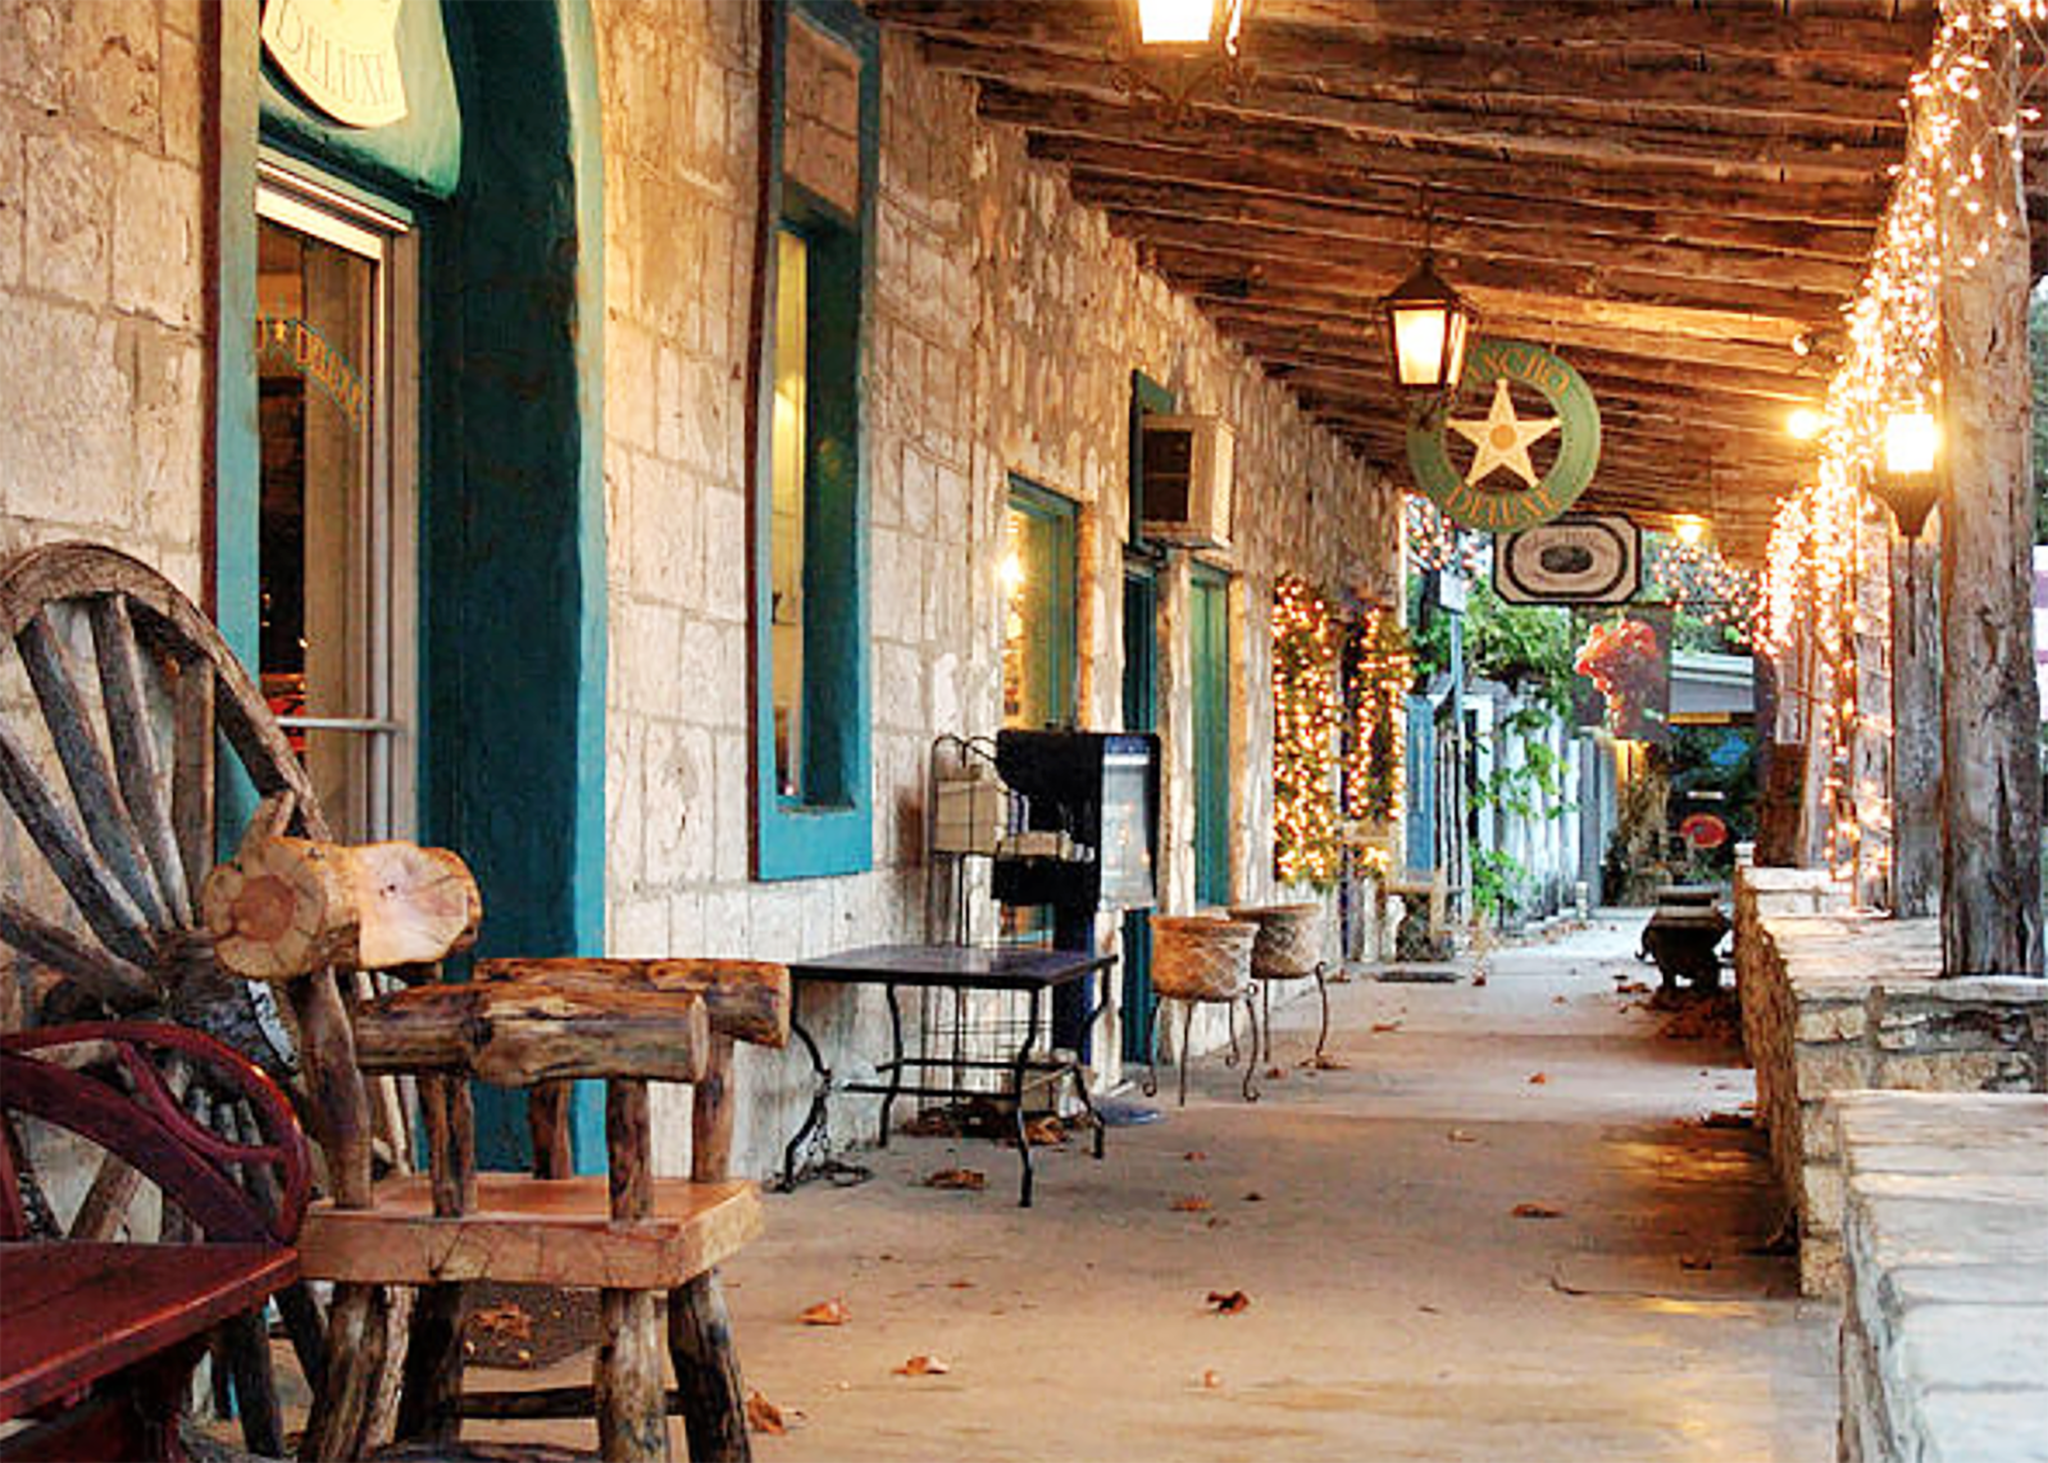 Shops in Wimberly